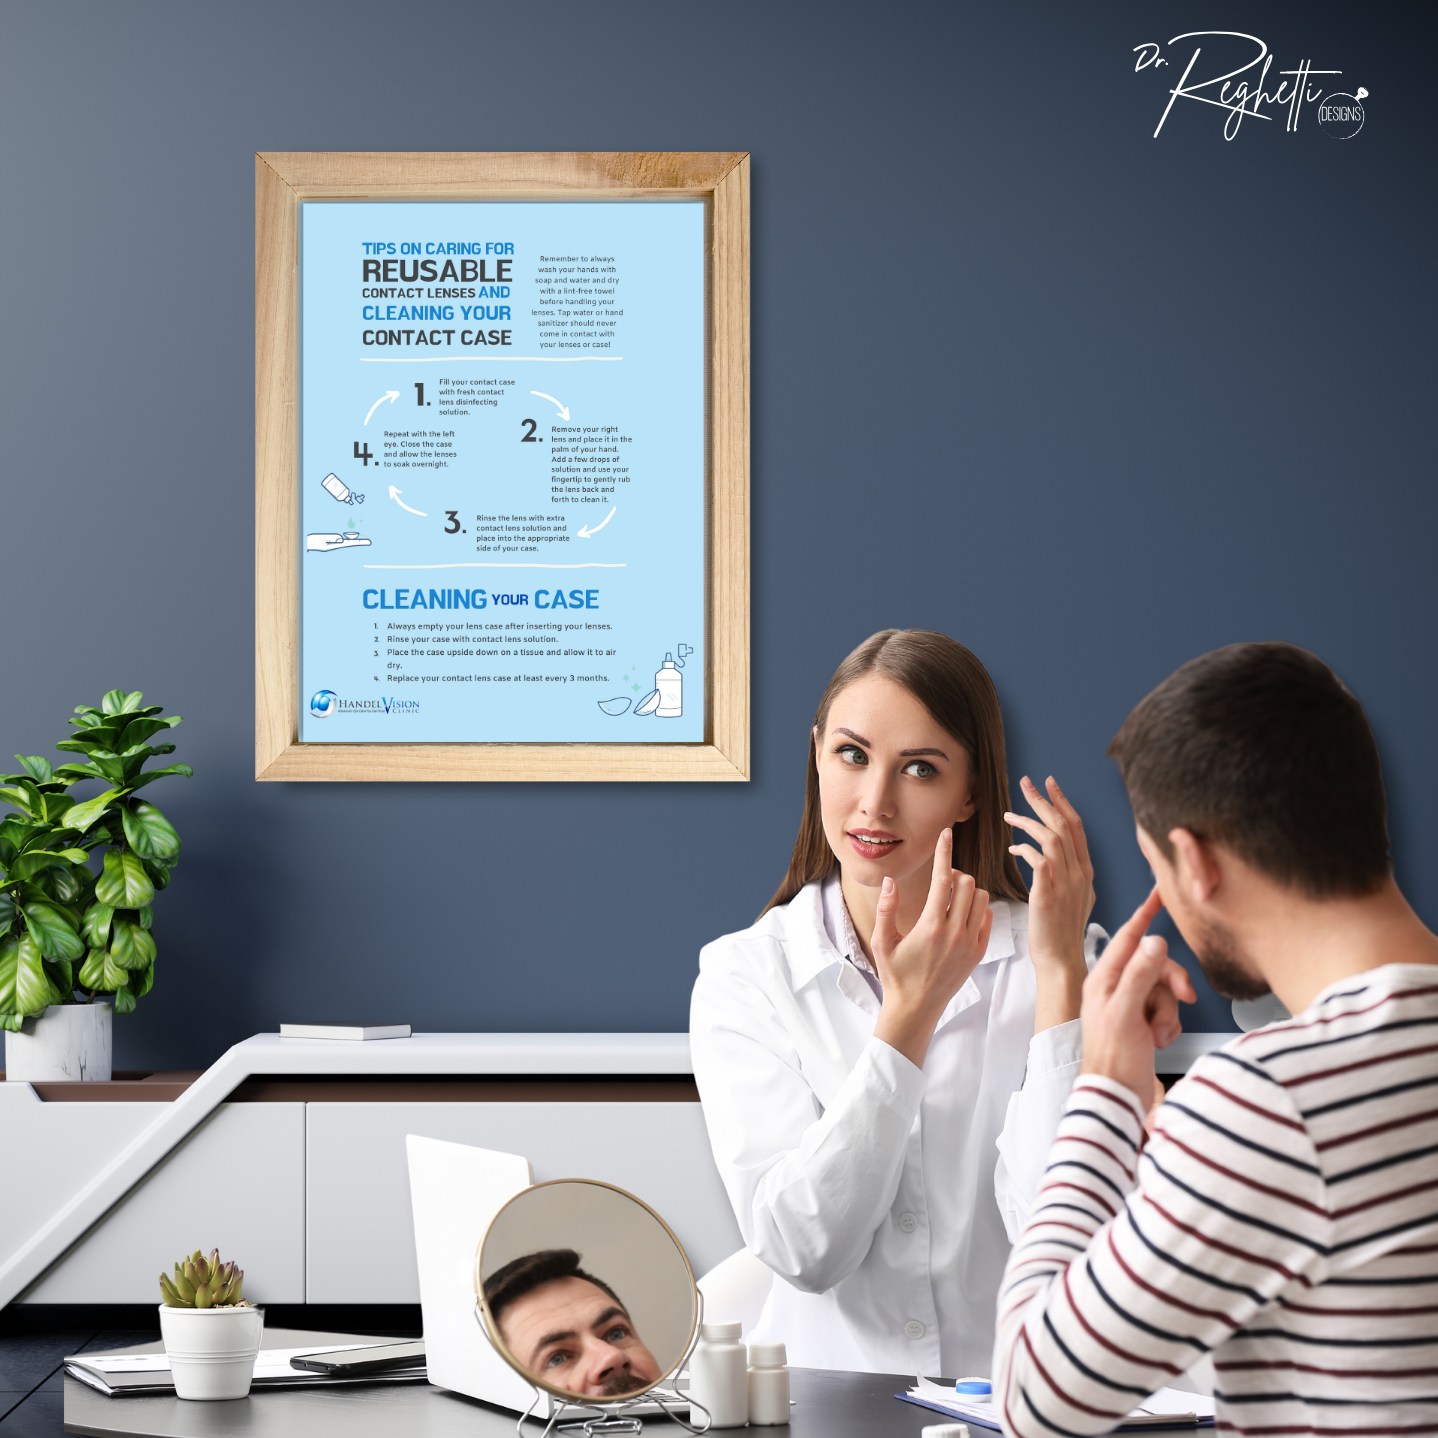 reusable contact lens wearer guide with handling tips for optometrists poster